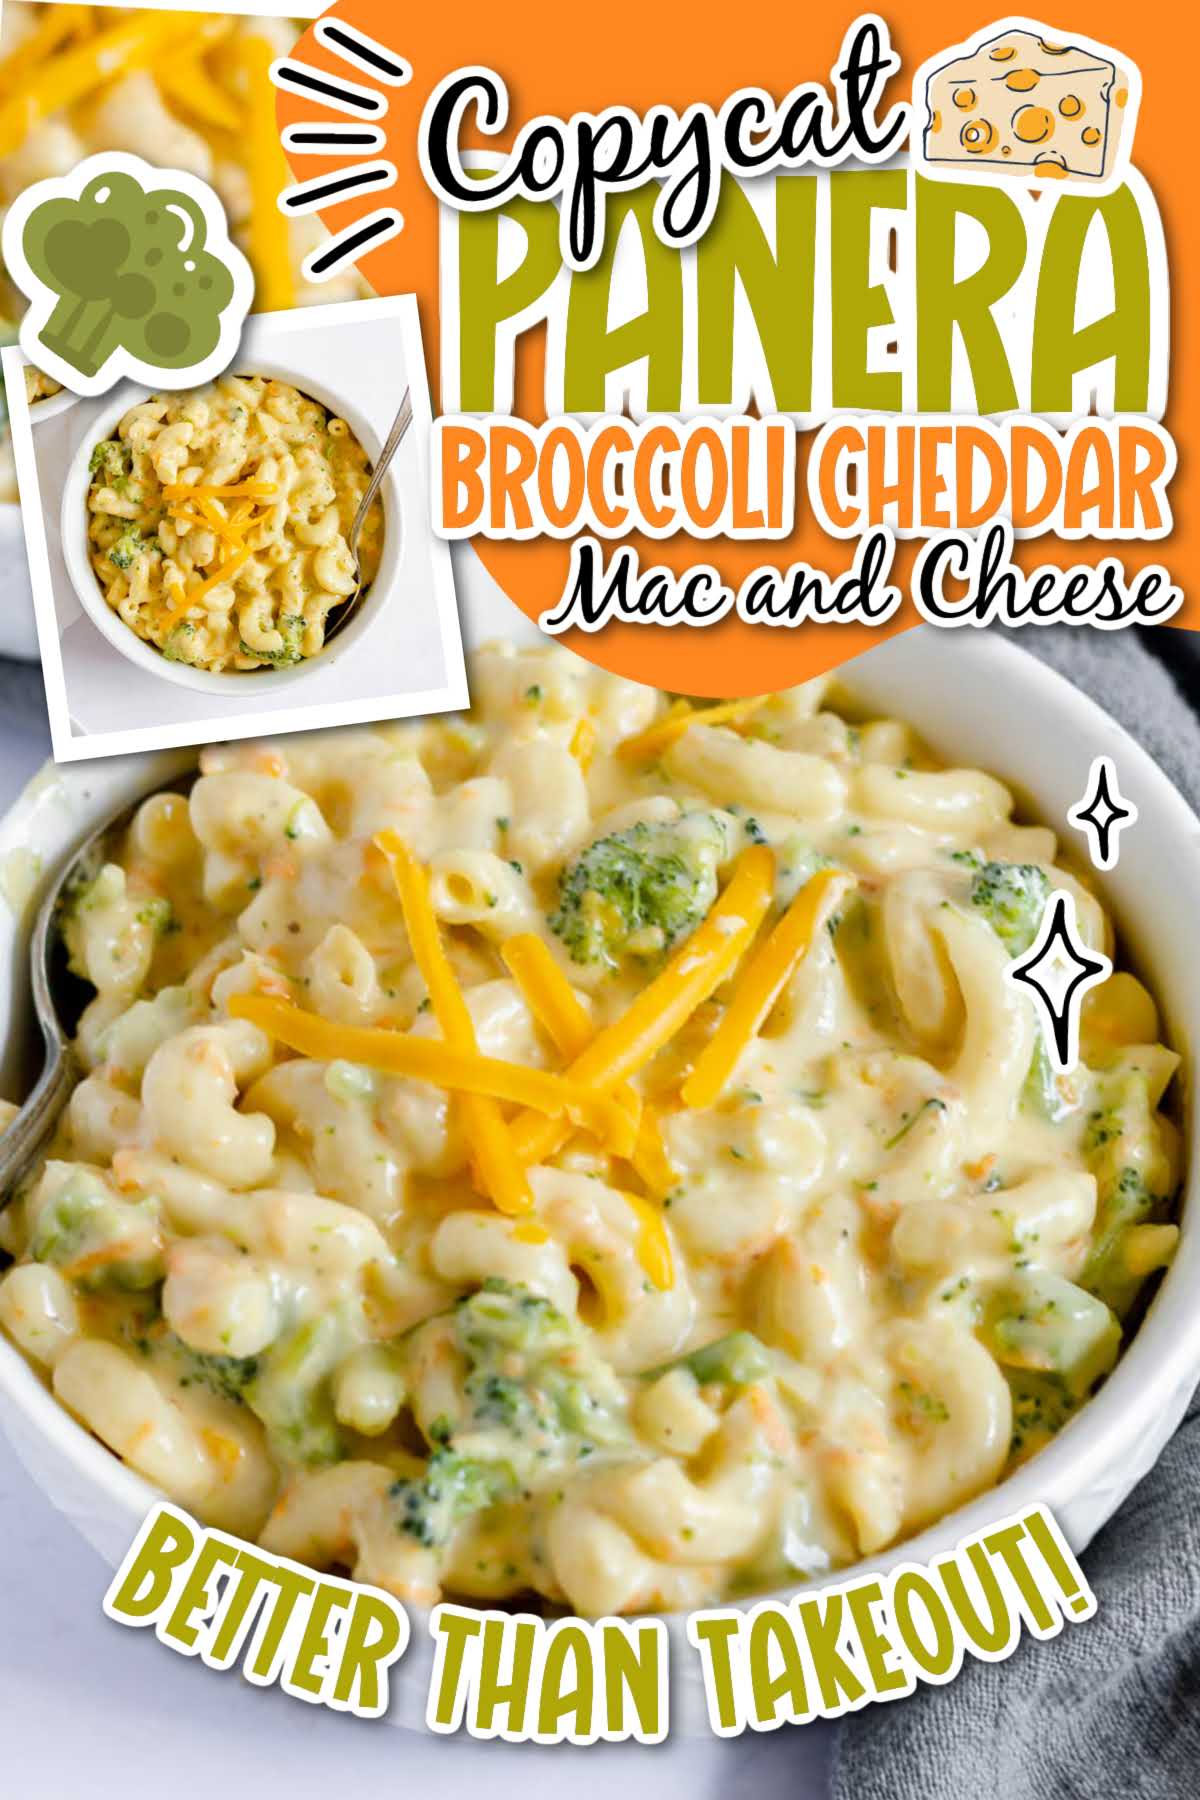 Photo collage of Panera Broccoli Cheddar Mac and Cheese in a white bowl with text and graphic overlay.